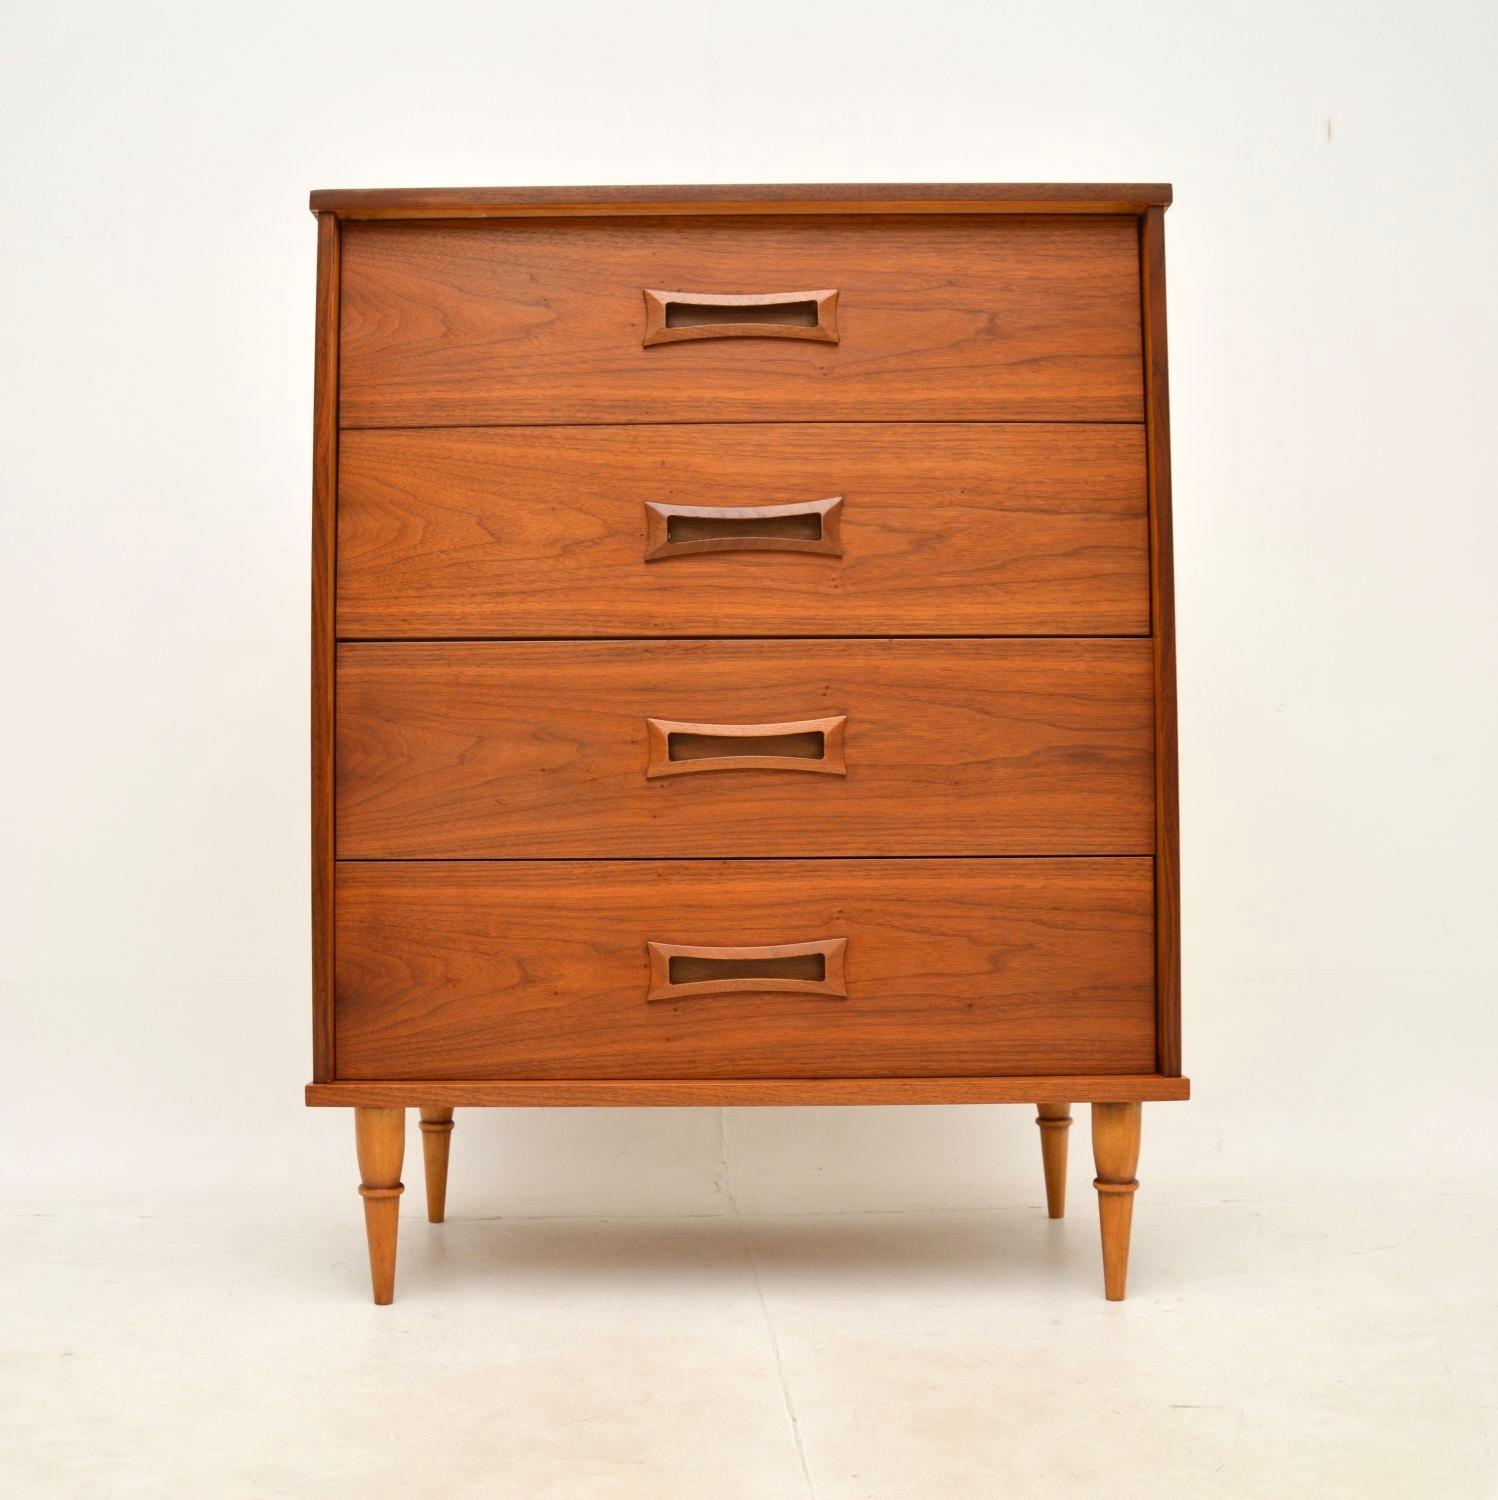 A very stylish and well made vintage walnut chest of drawers. This was made in the USA, it dates from the 1960’s.

The quality is excellent, this is beautifully designed and has lots of storage space inside the four generous drawers. The drawer